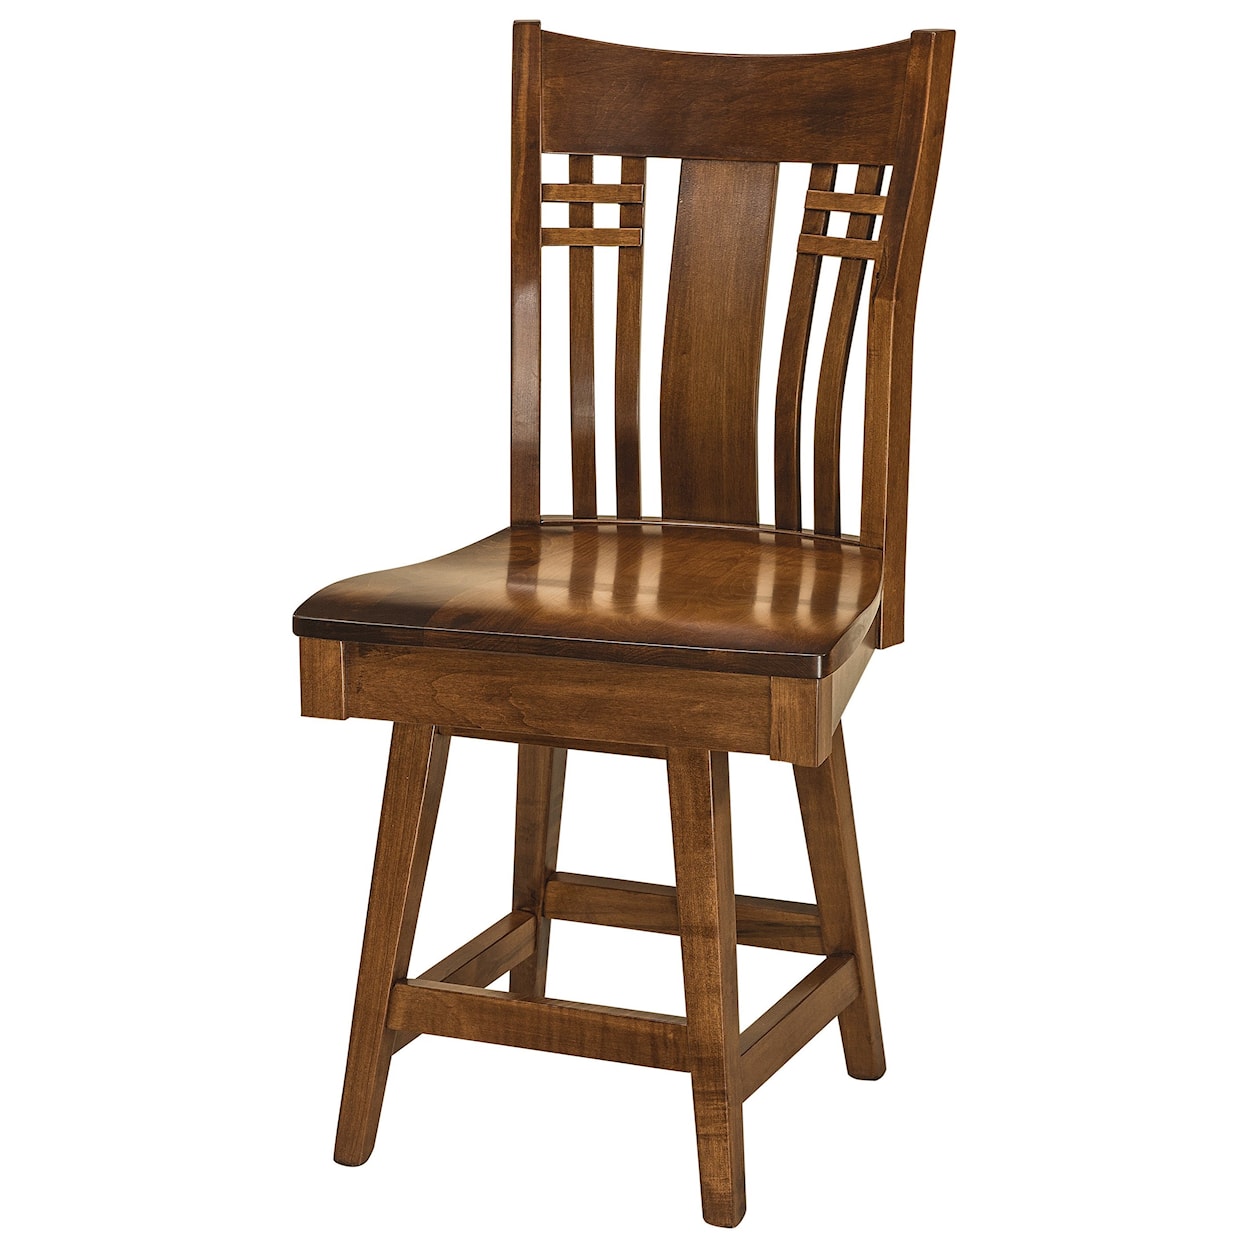 F&N Woodworking Bennet Swivel Counter Height Stool - Wood Seat